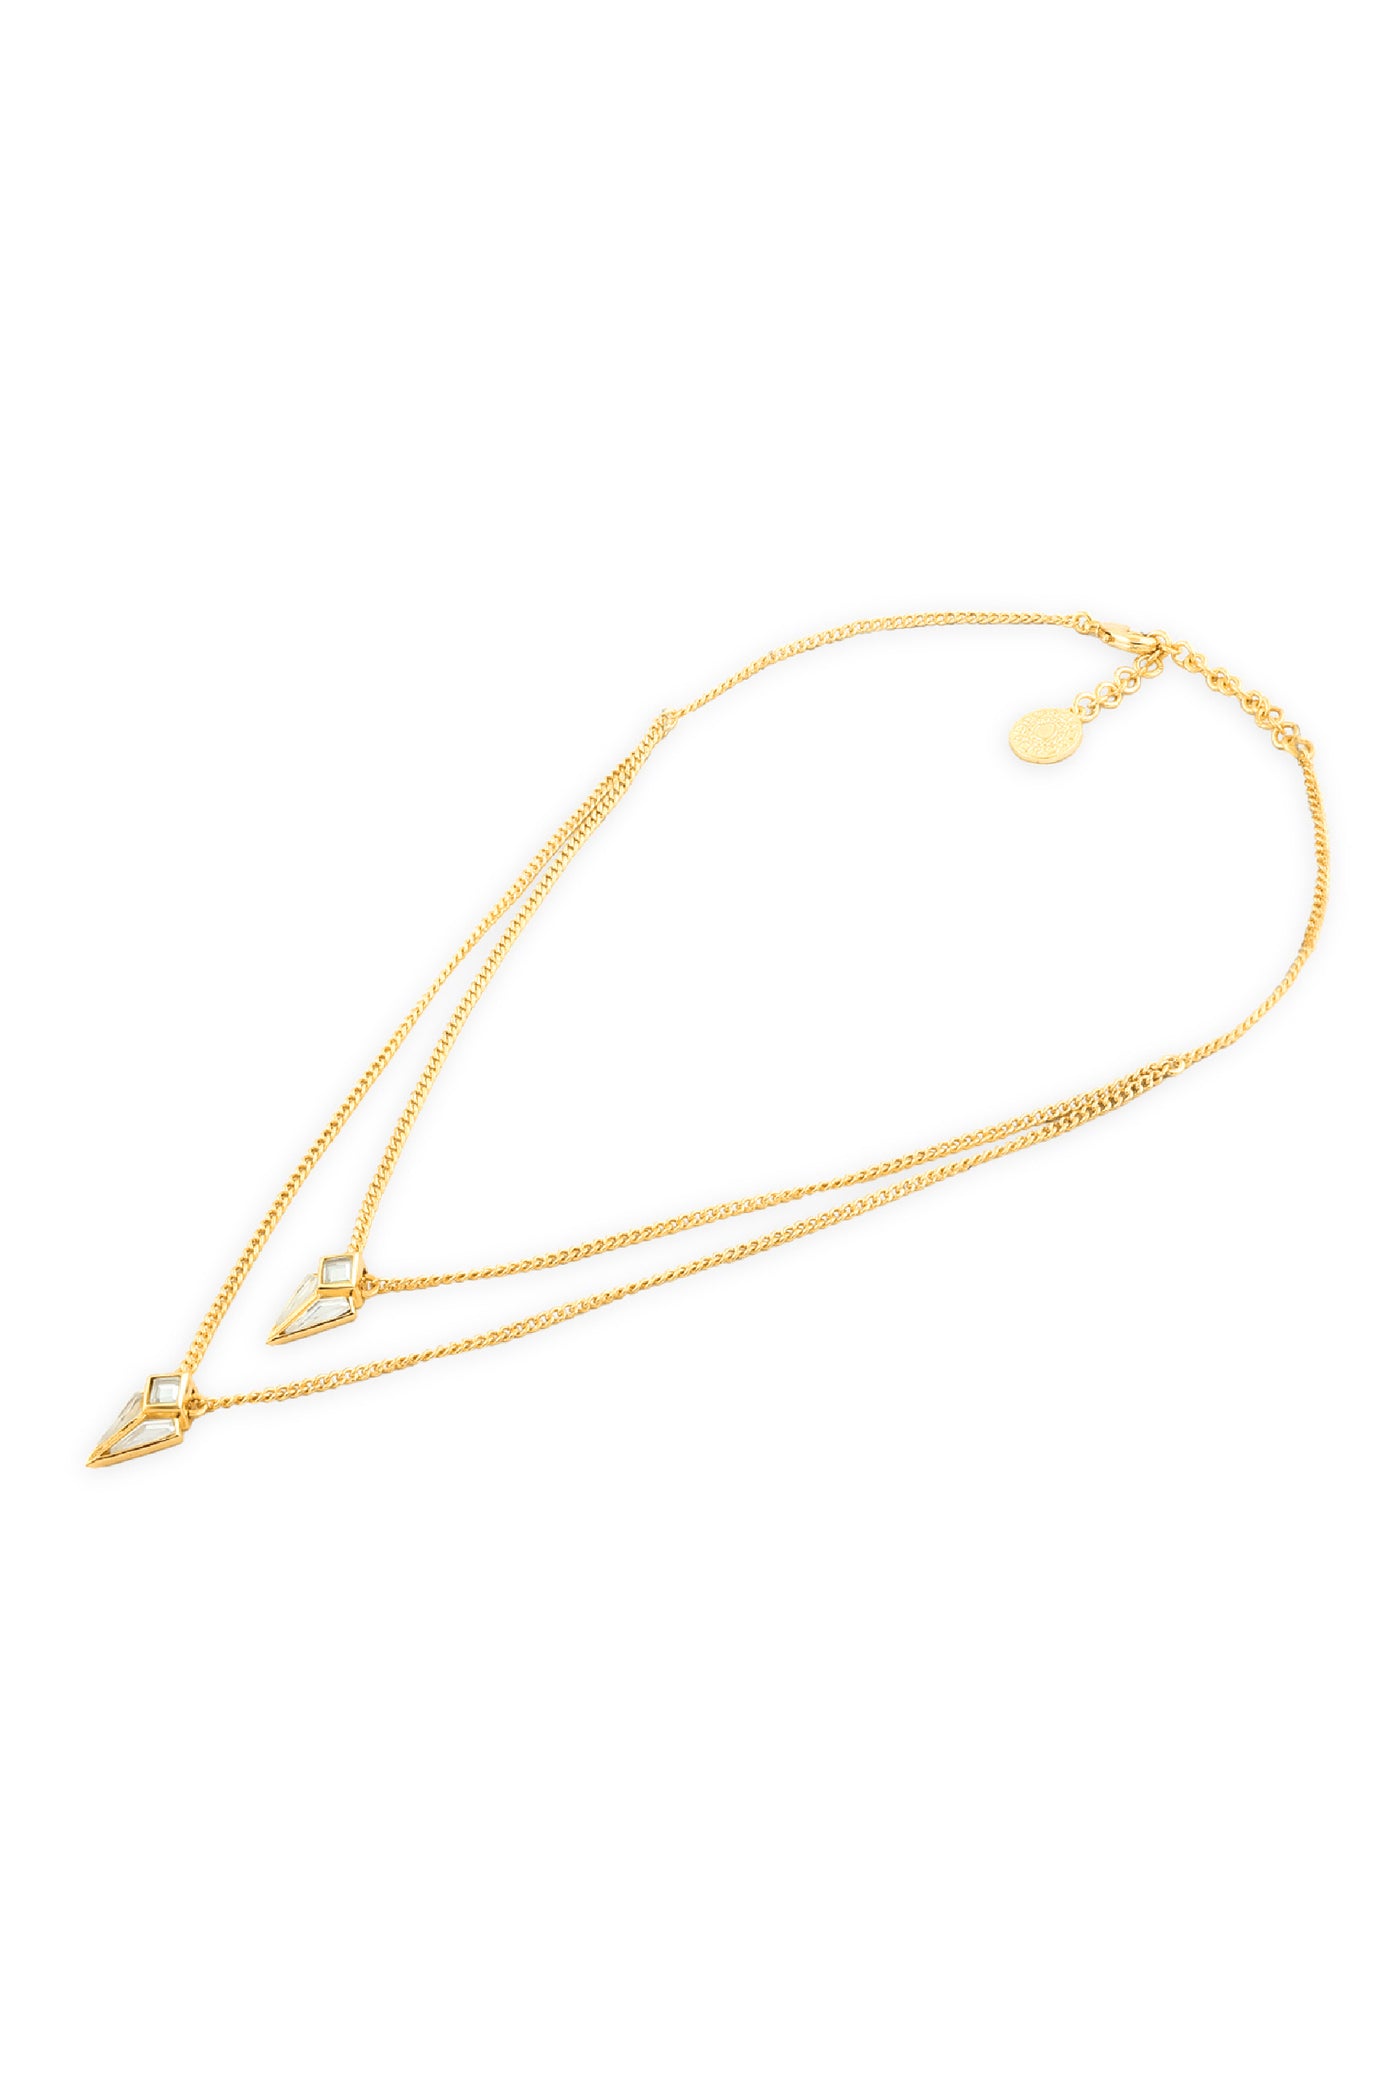 Isharya Essential Mirror Pearl Duo Necklace In 18Kt Gold Plated indian designer wear online shopping melange singapore